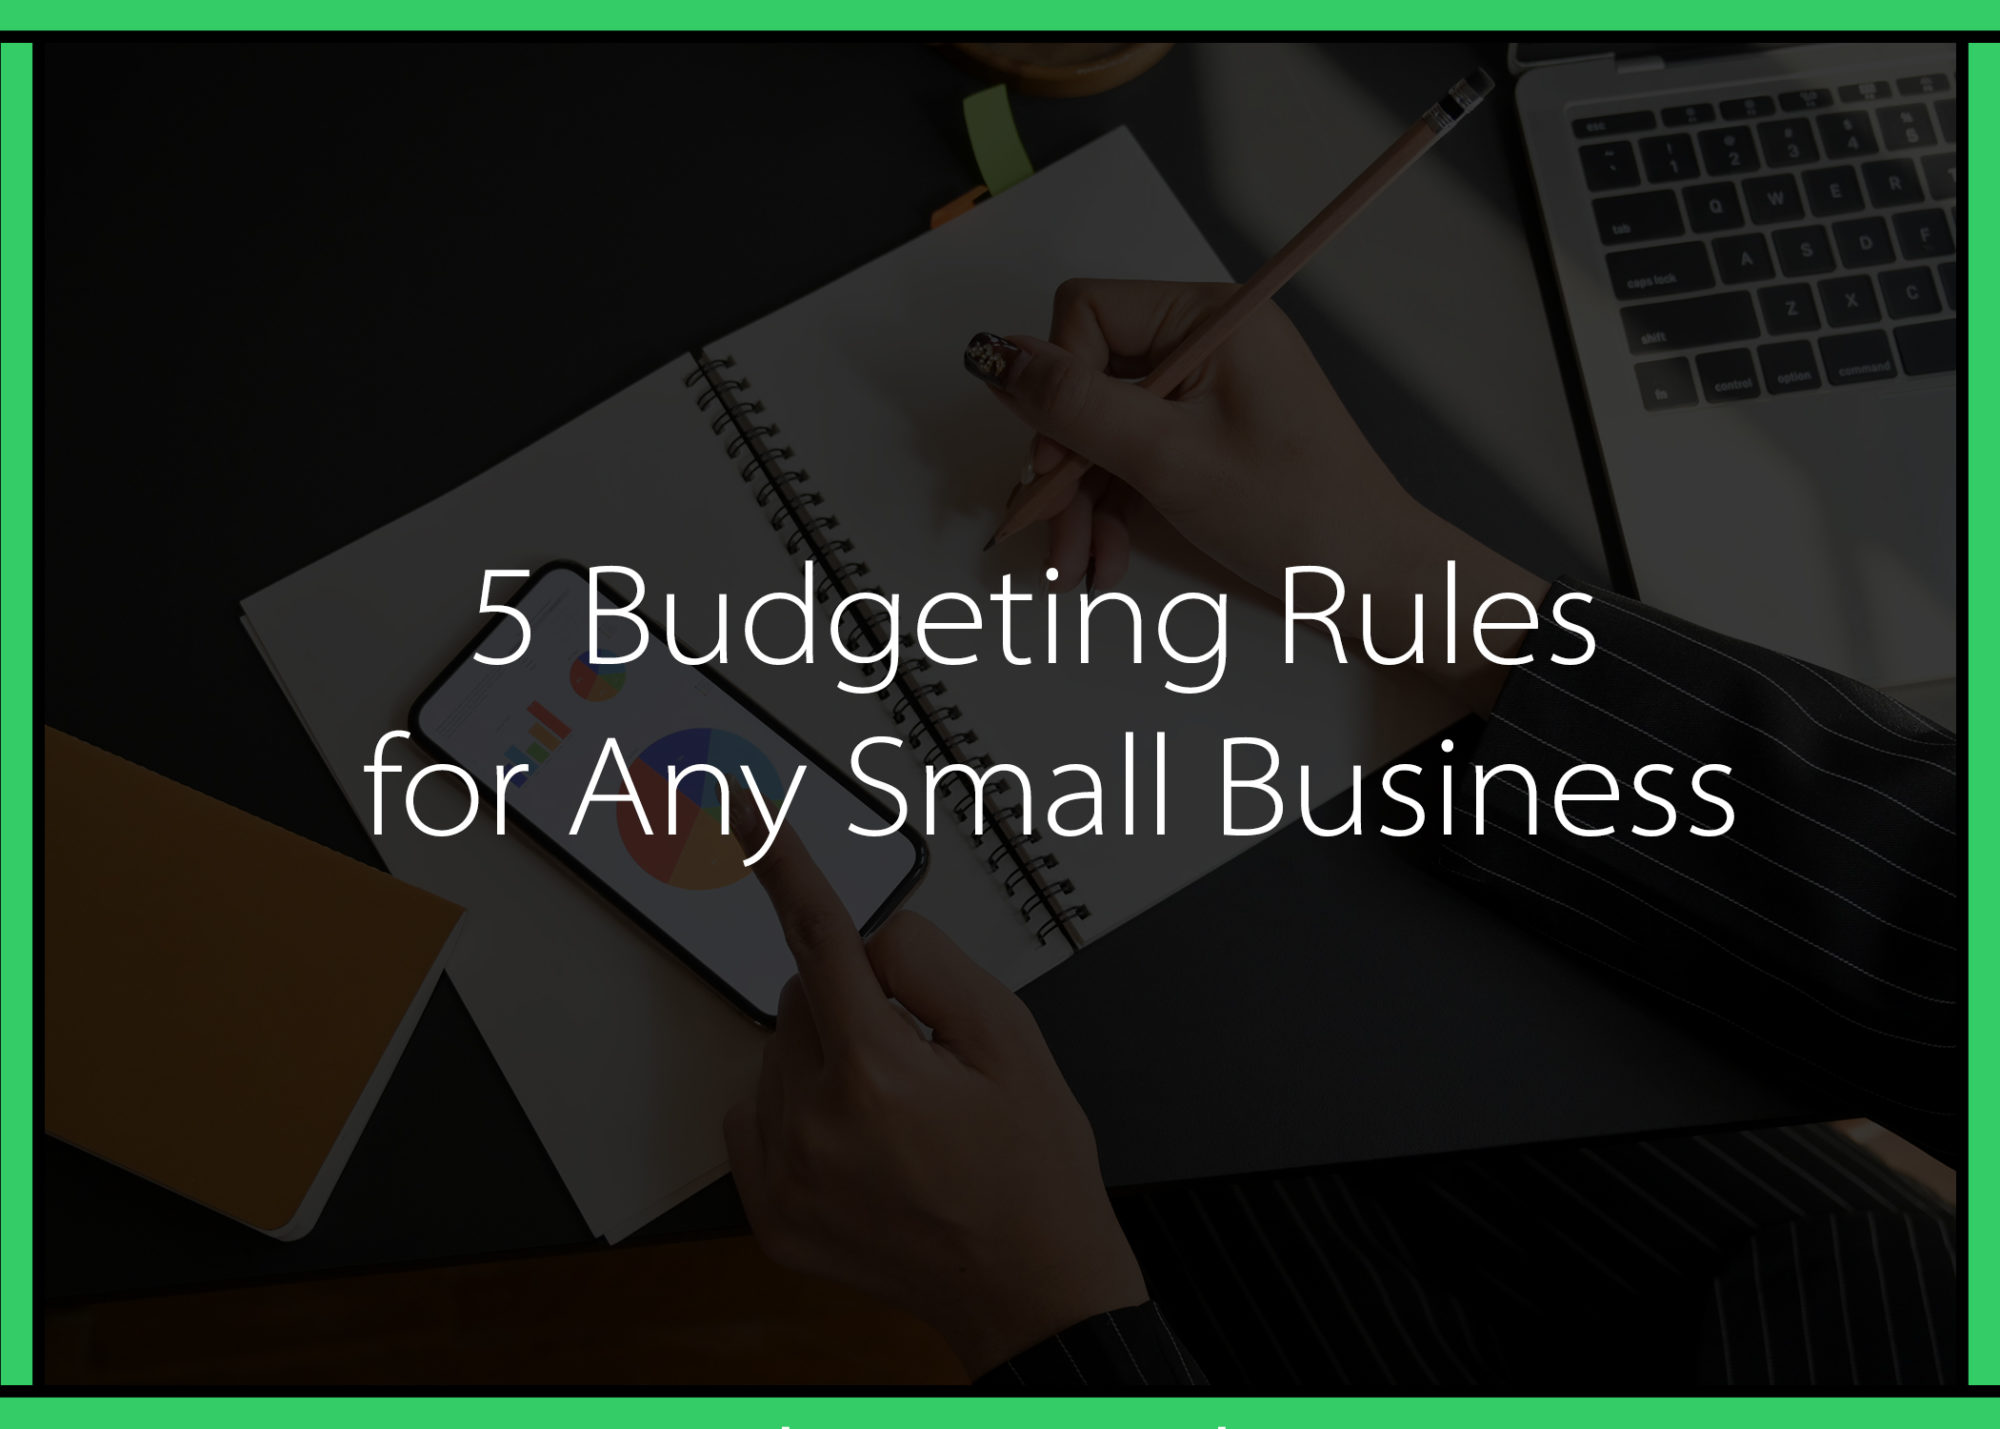 5 Budgeting Rules for Any Small Business